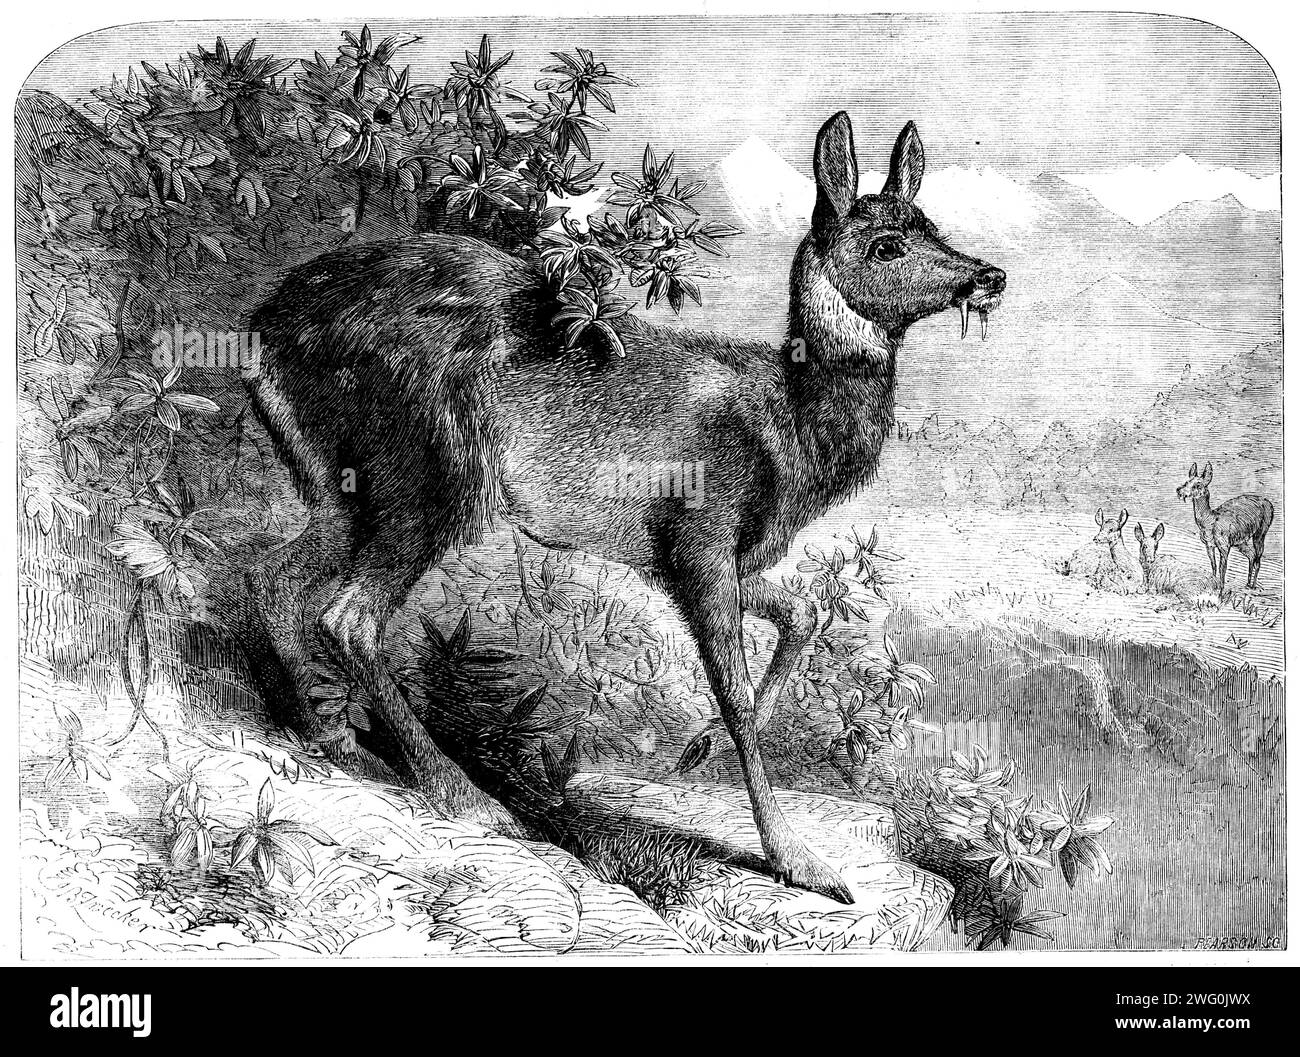 The musk deer, 1862. 'The true musk perfume has been brought to Europe for many years, but the animal which yields it has never yet been seen alive in this hemisphere...Musk is contained in an excretory gland about the navel of the male animal. By the Chinese and other dealers this gland is termed a &quot;pod,&quot; and as imported it is called &quot;pod musk,&quot; but when the musk is separated from the skin or sac in which it is contained it is termed &quot;grain musk,&quot; the commercial value of which is very nearly that of gold, weight for weight. The musk deer (Moschus moschatus) is an Stock Photo